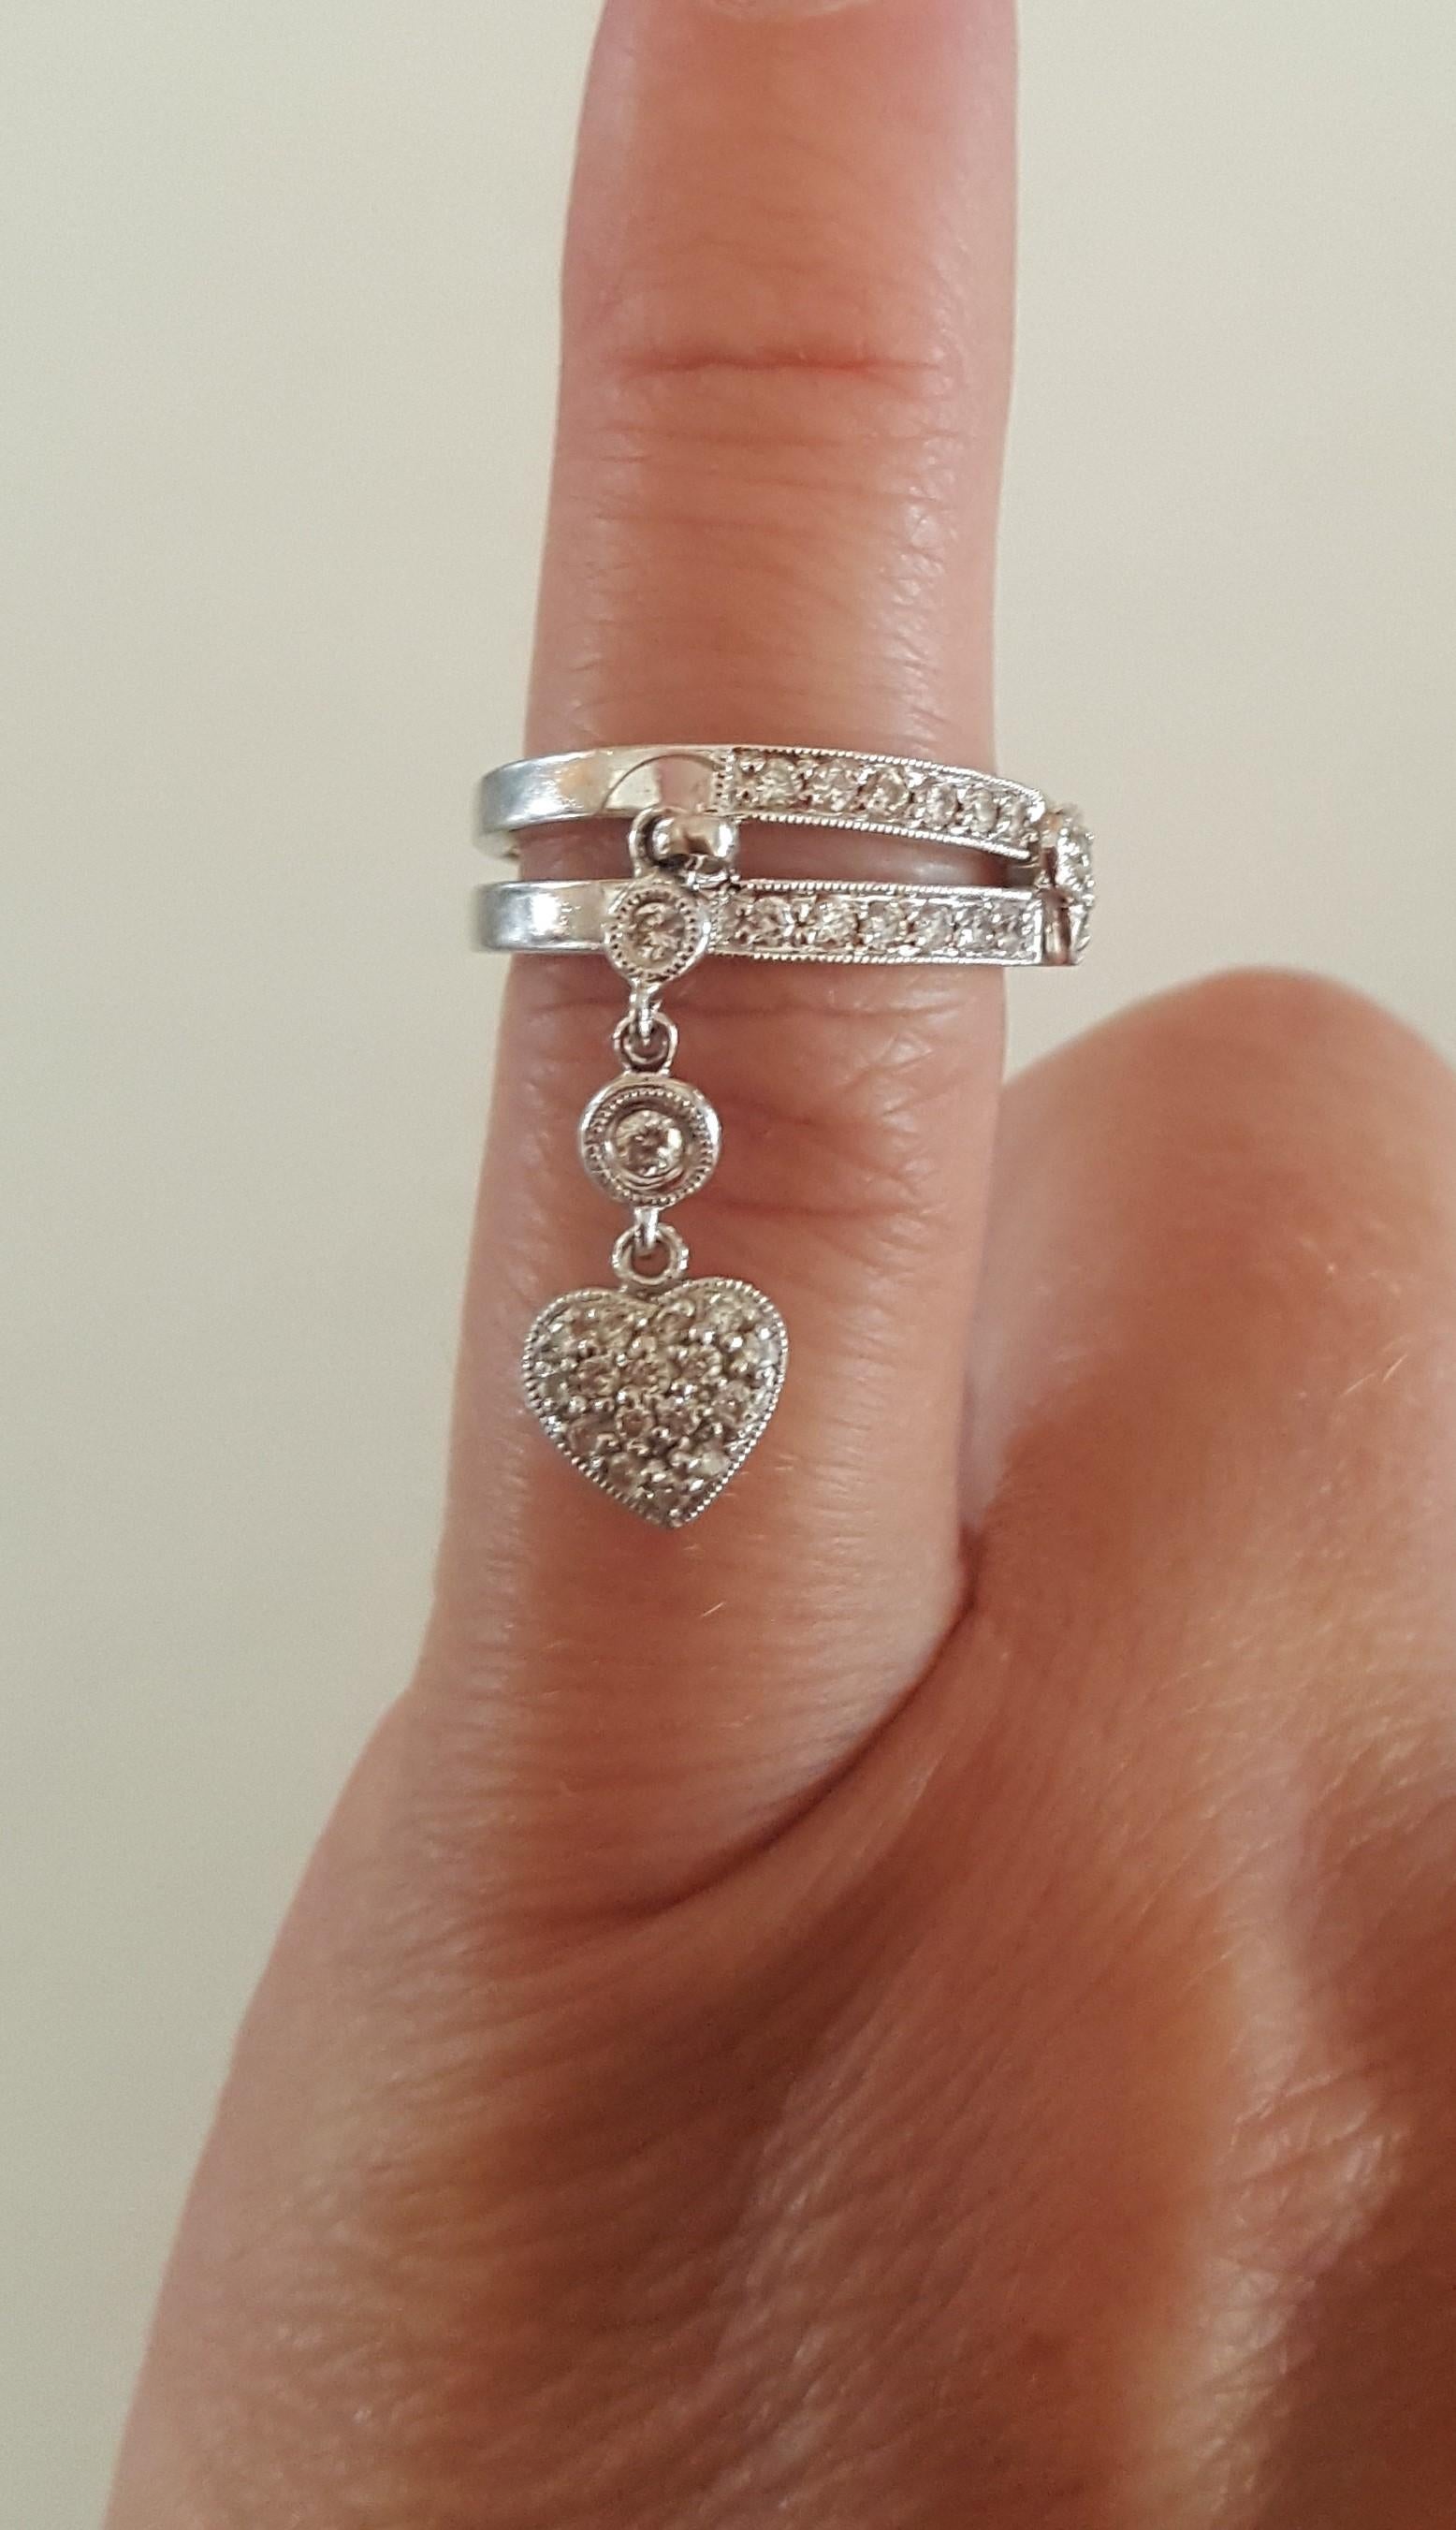 ring with hanging charm